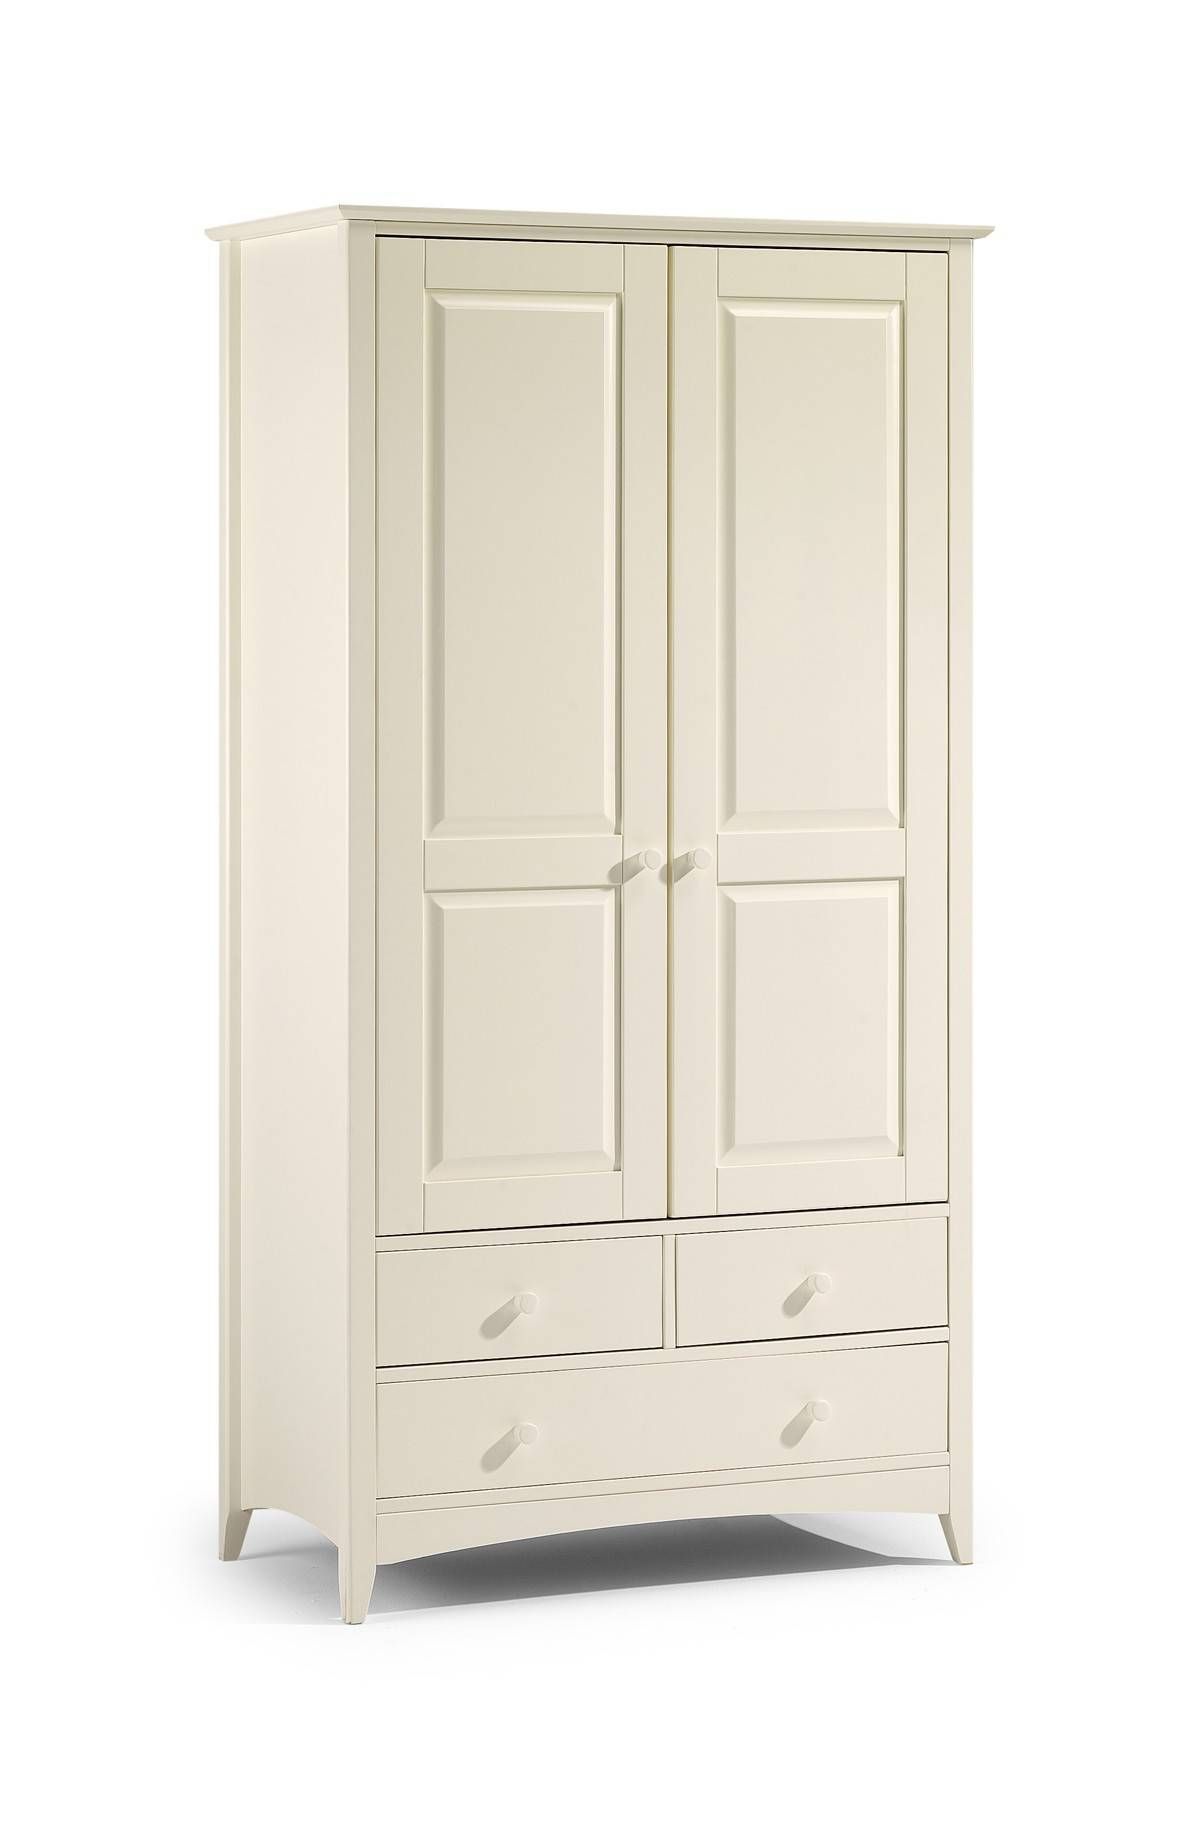 Julian Bowen Cameo Stone White Combination Wardrobe With Drawers Intended For Julian Bowen Wardrobes (Photo 1 of 15)